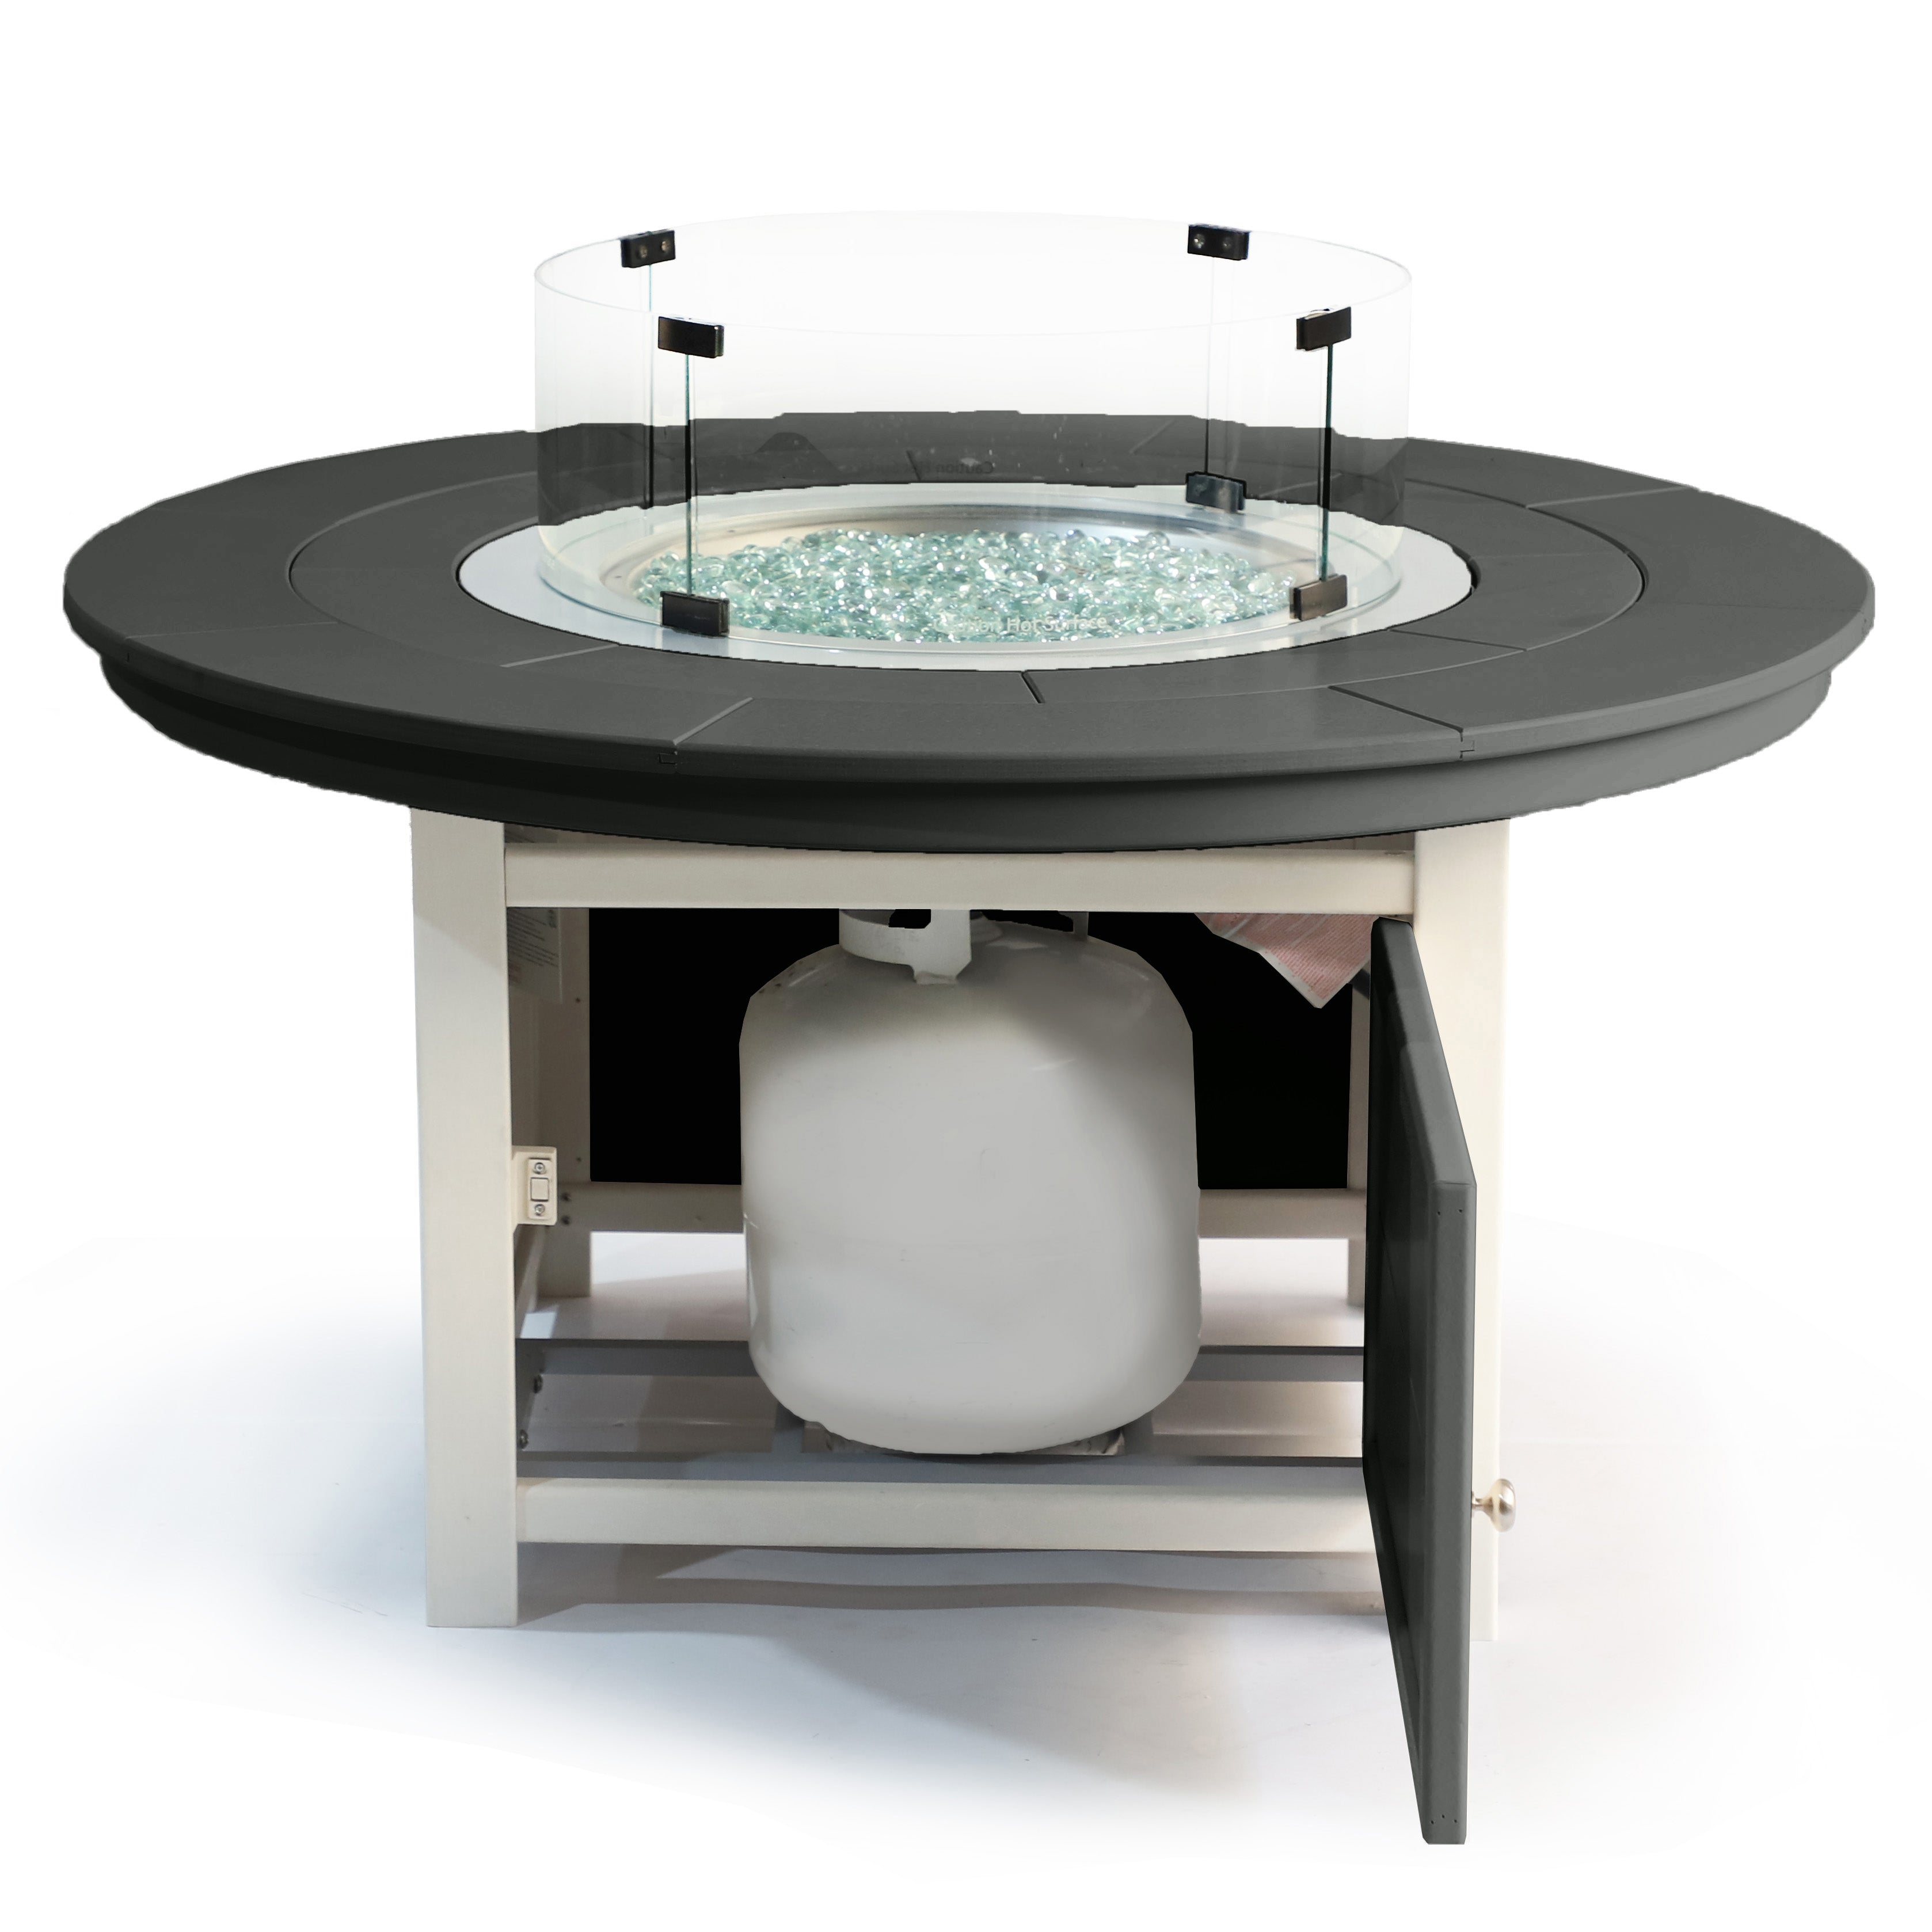 LuXeo Vail 25"(H) x 48"(W) Round Two-Tone Poly Fire Pit Table